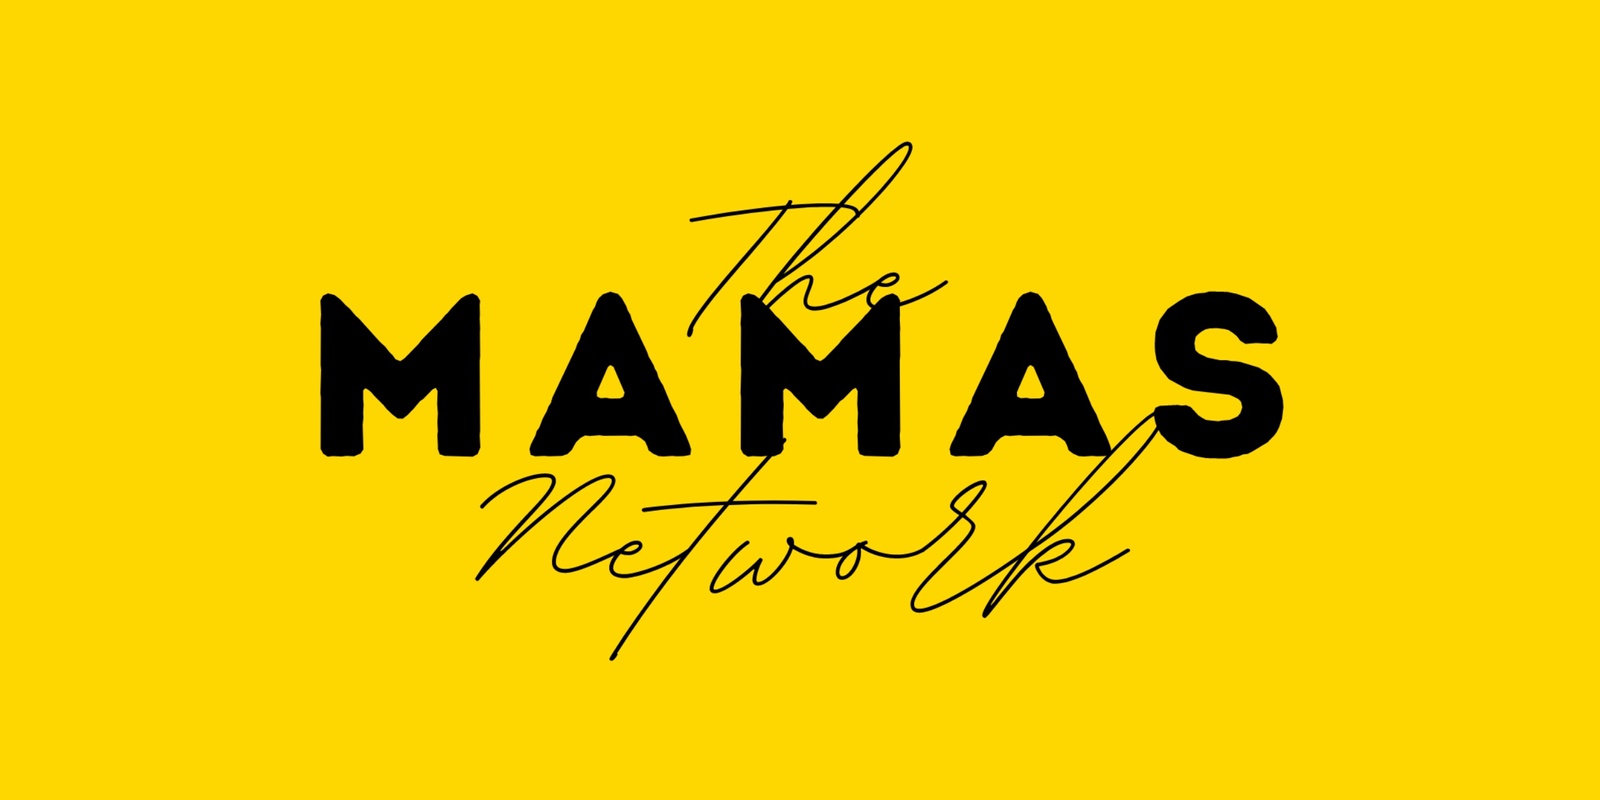 The Mamas Network's banner